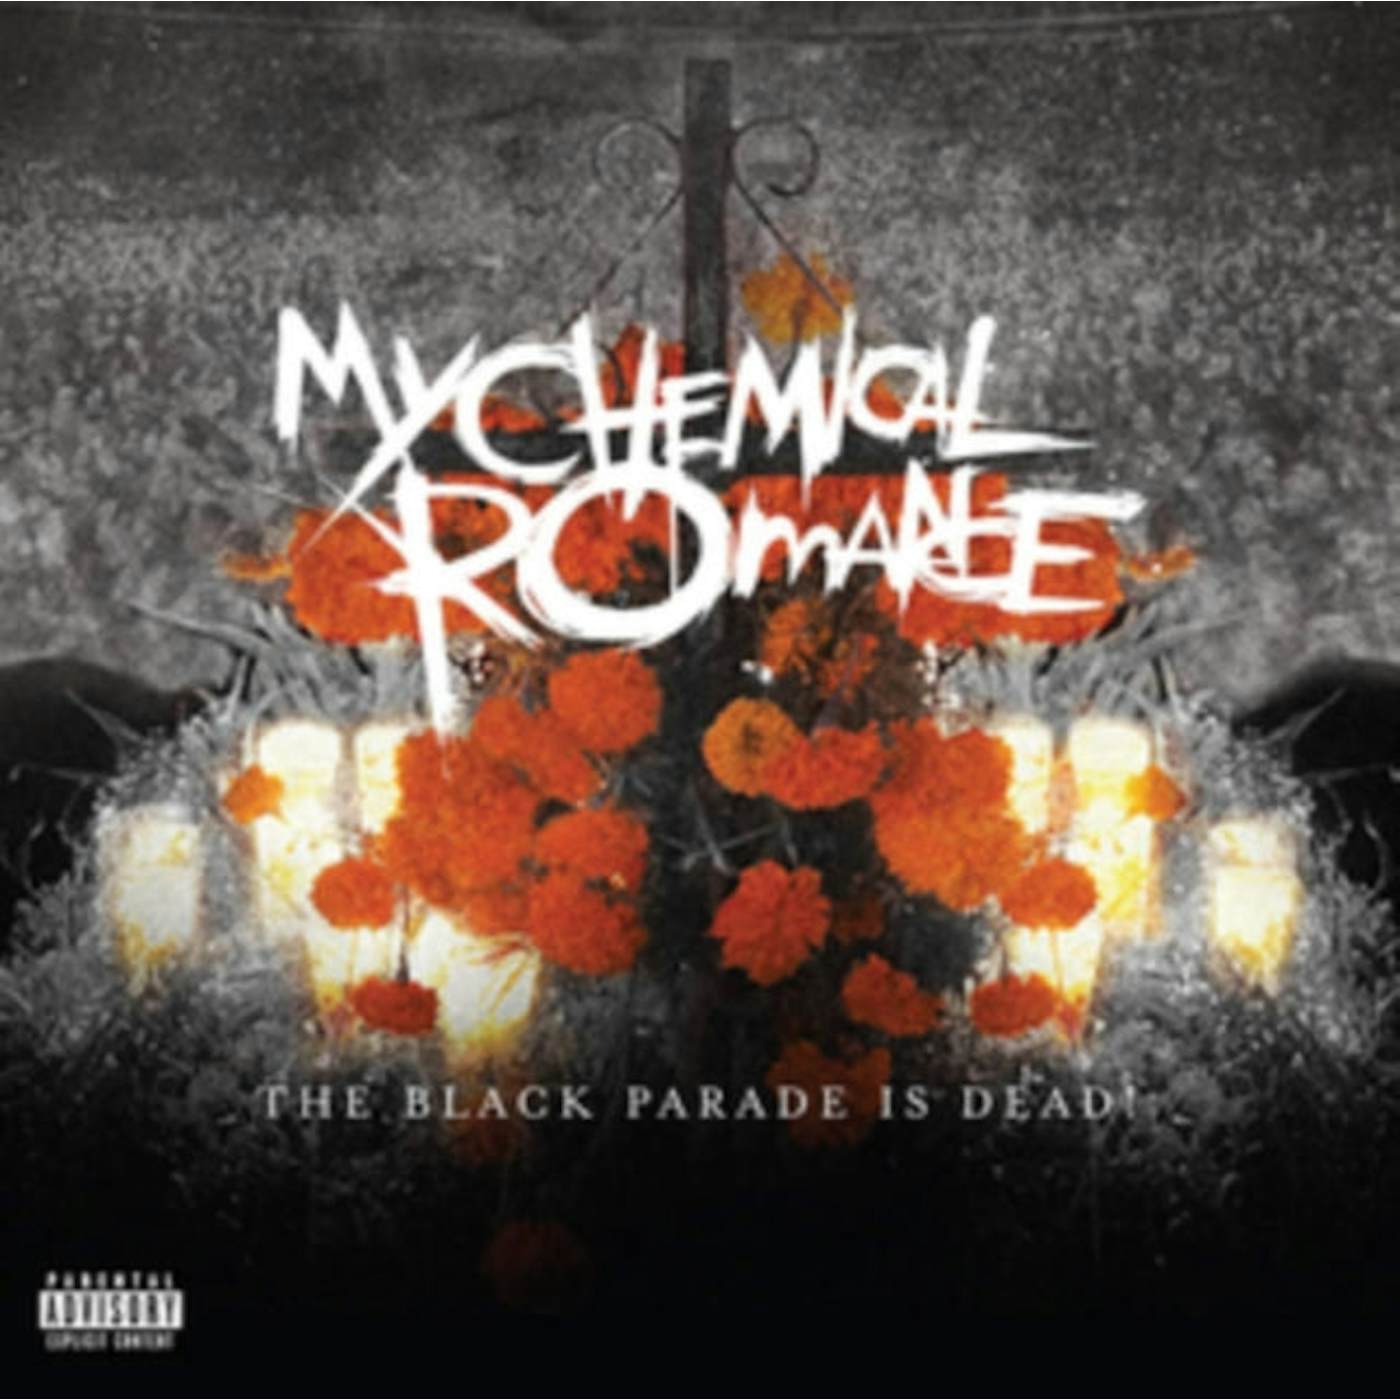 My Chemical Romance LP Vinyl Record - The Black Parade Is Dead!